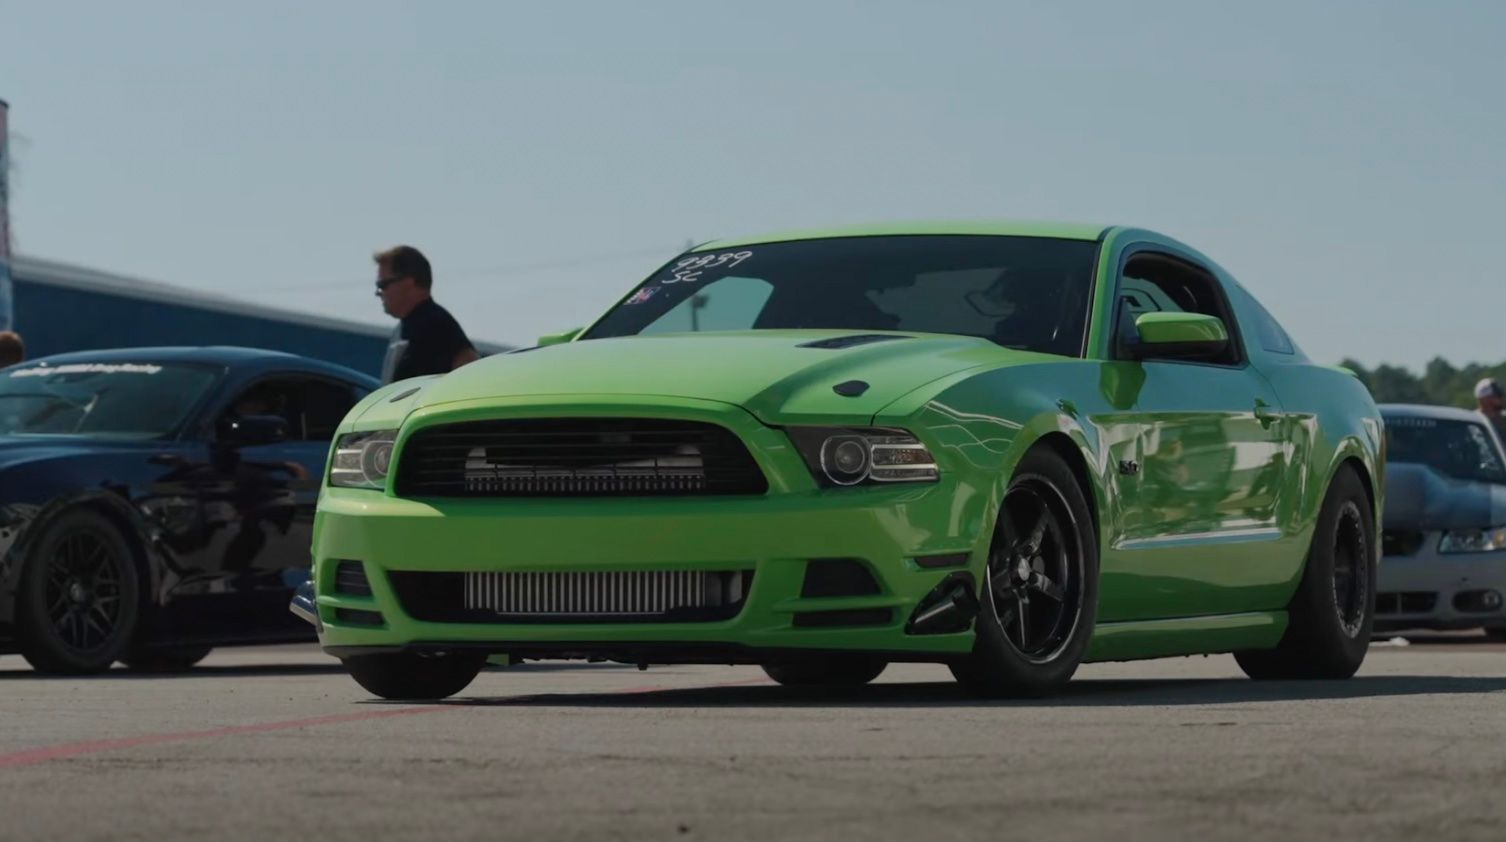 Fastest Coyote Mustang Ever Breaks 213 MPH In Just 6.6 Seconds